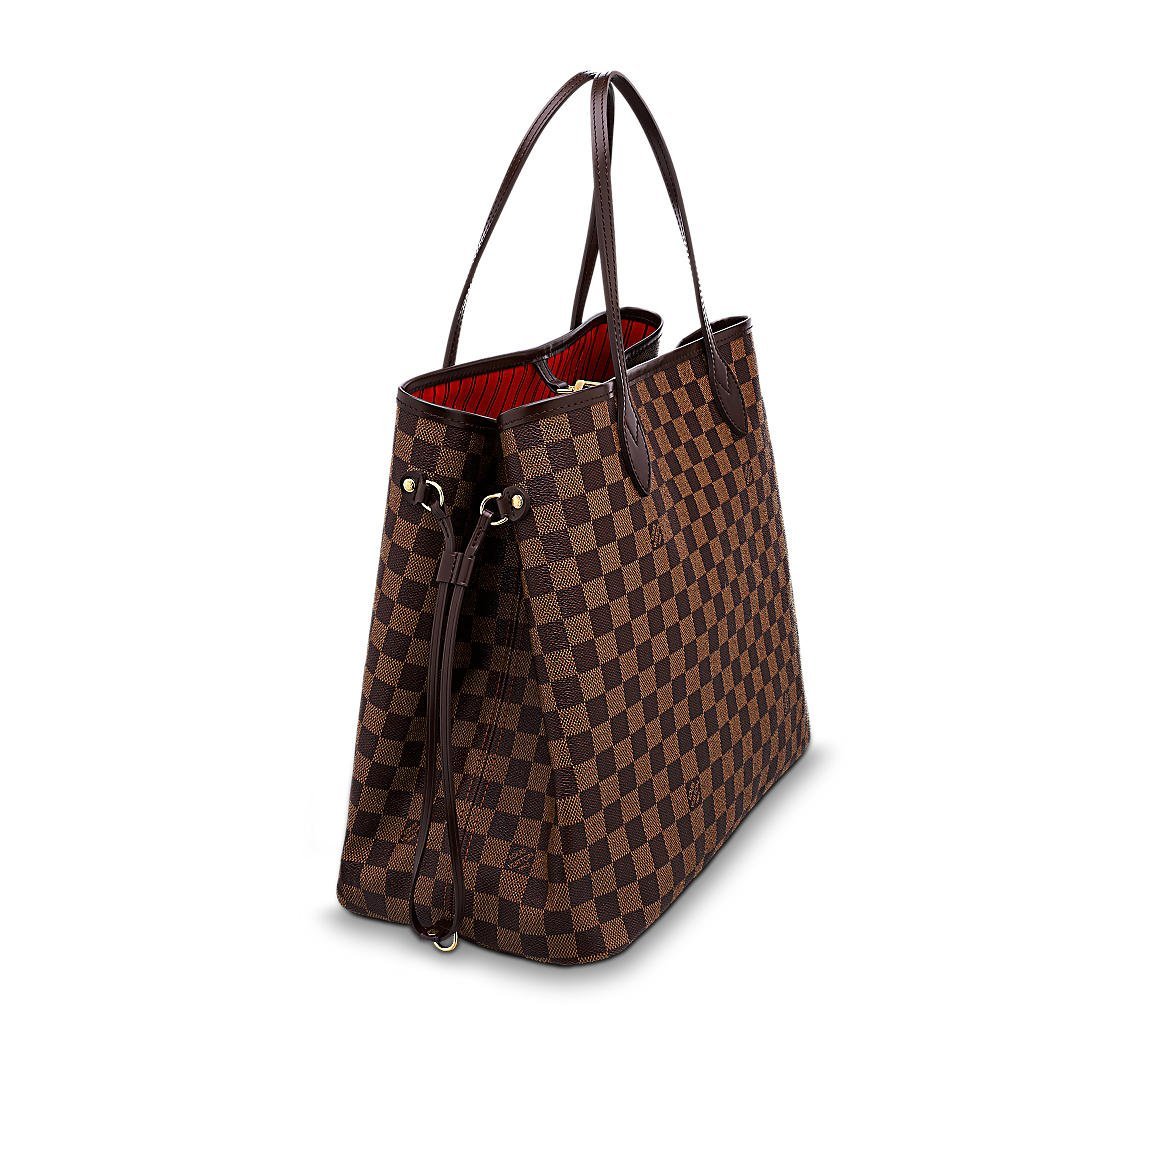 best luxury tote bag in the market especially for the price point! #re, Goyard